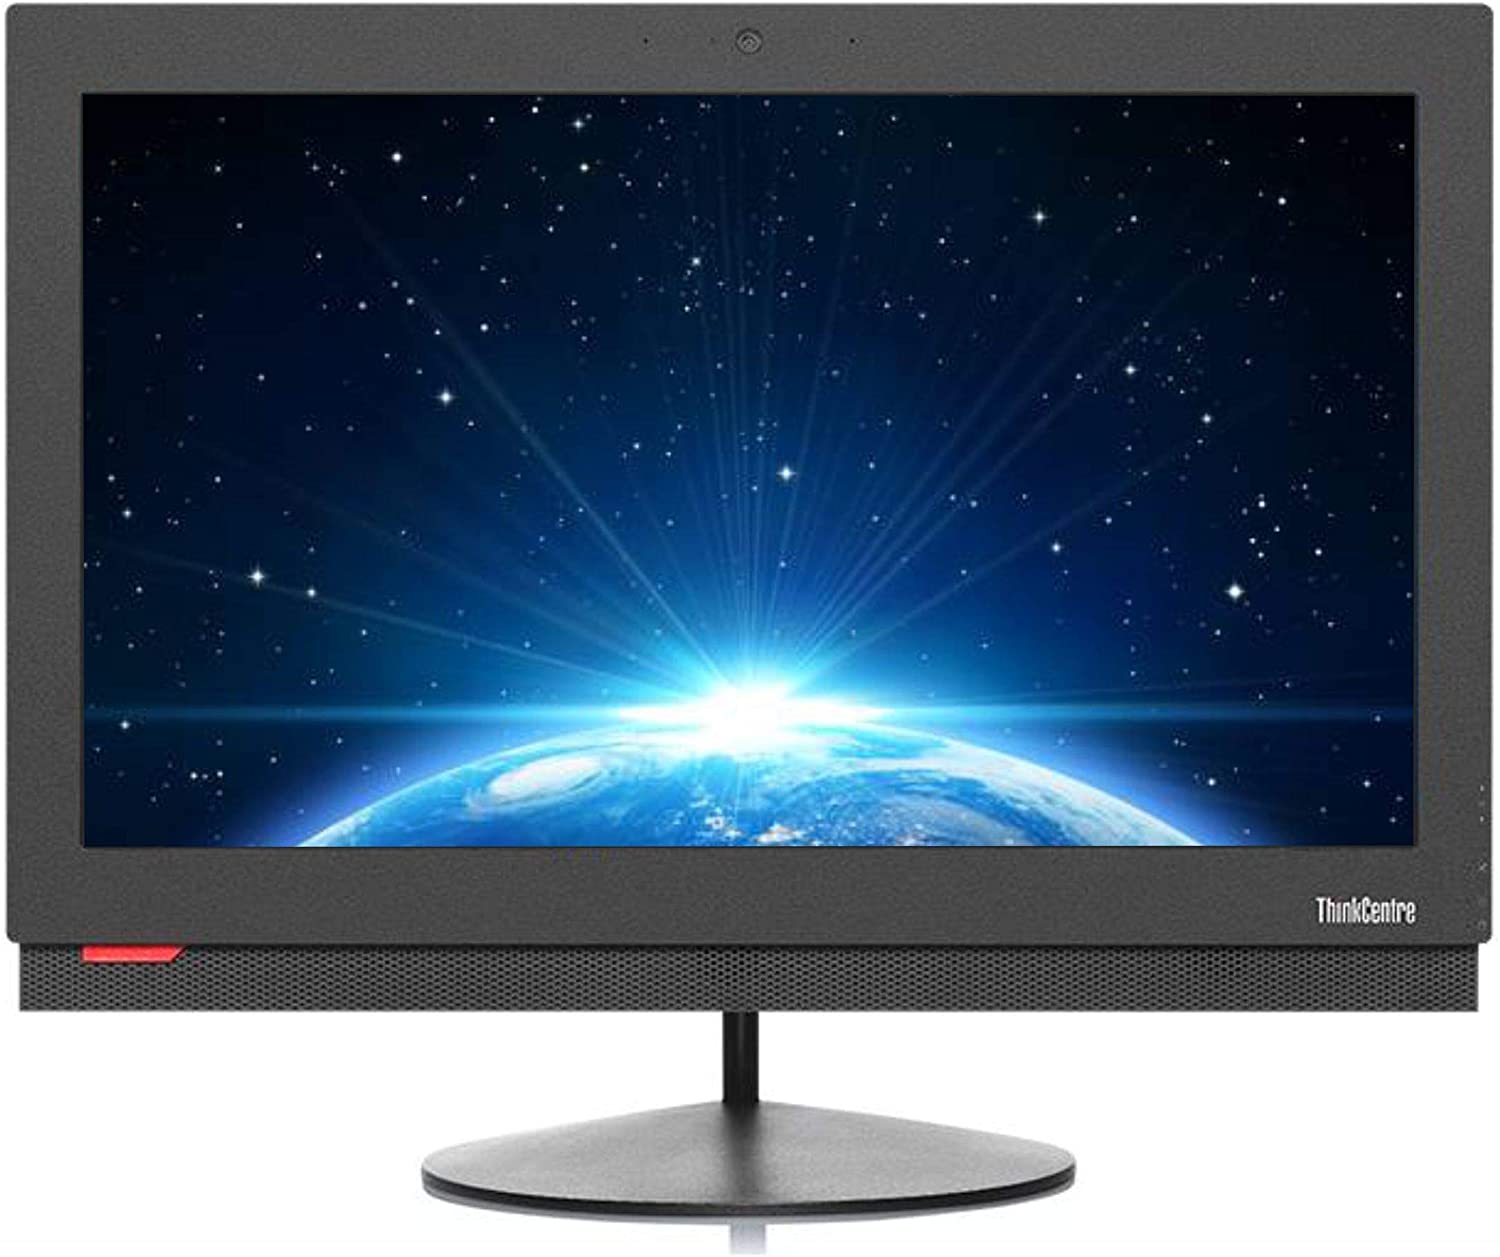 Lenovo ThinkCentre M800z All in One, 21.5